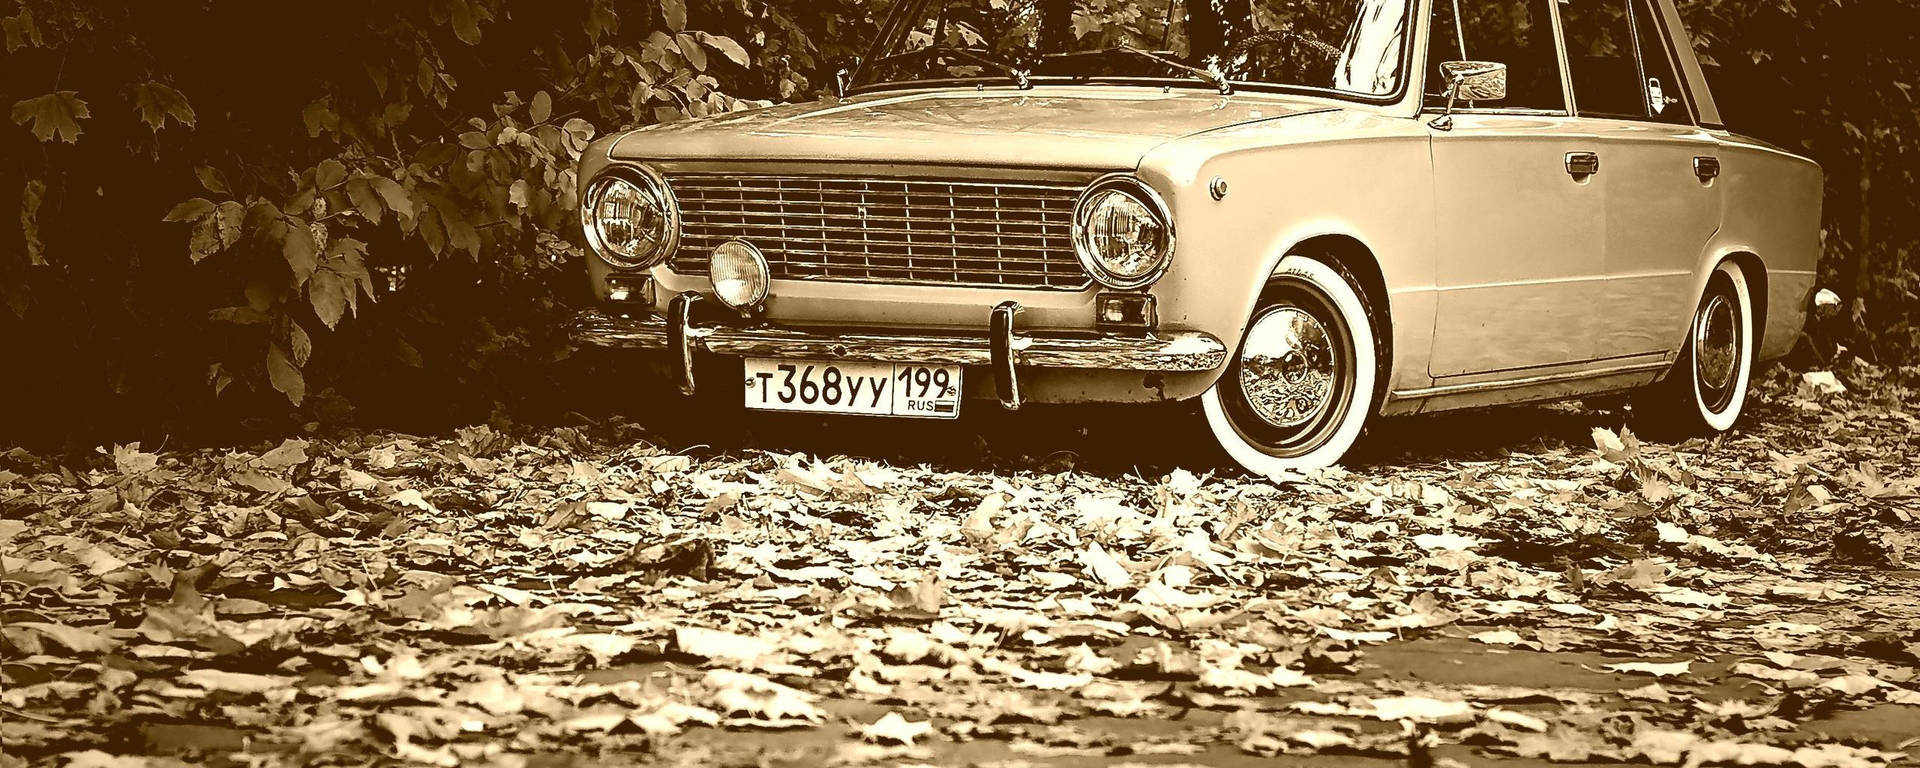 Cool Vintage Classic Aesthetic Car Wallpaper